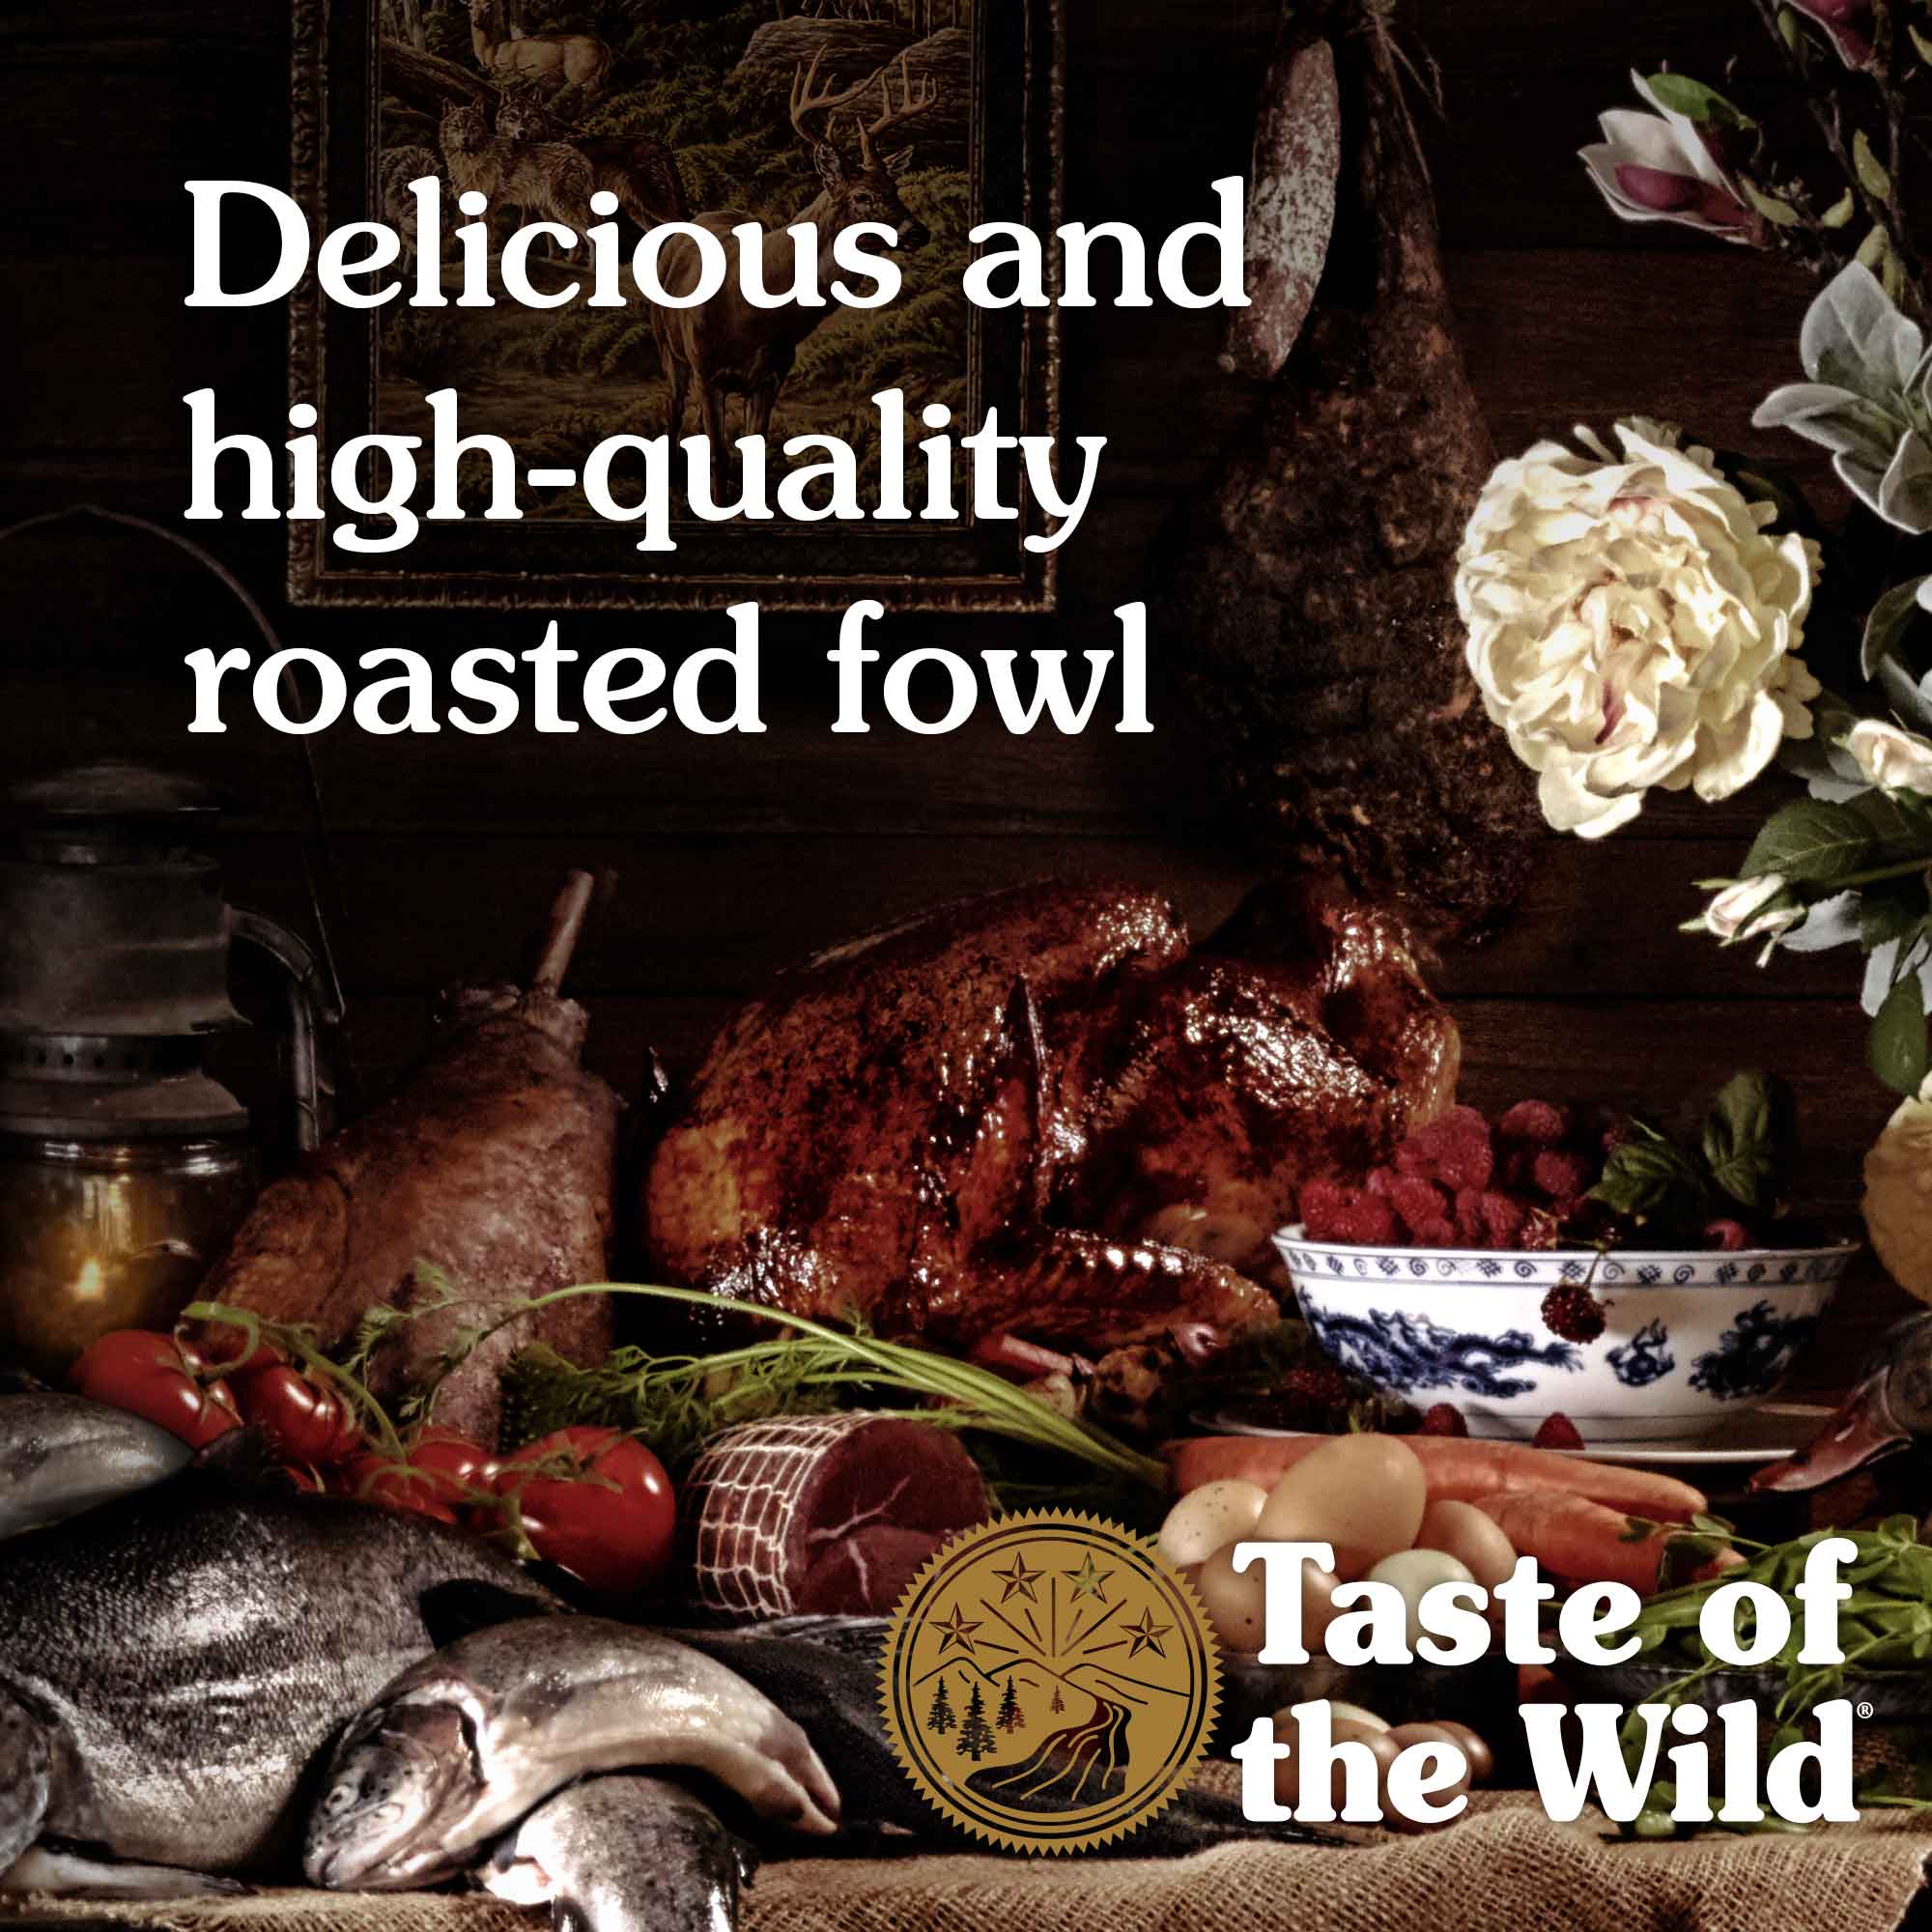 Taste Of The Wild Ancient Wetlands Dog Food - Mutts & Co.